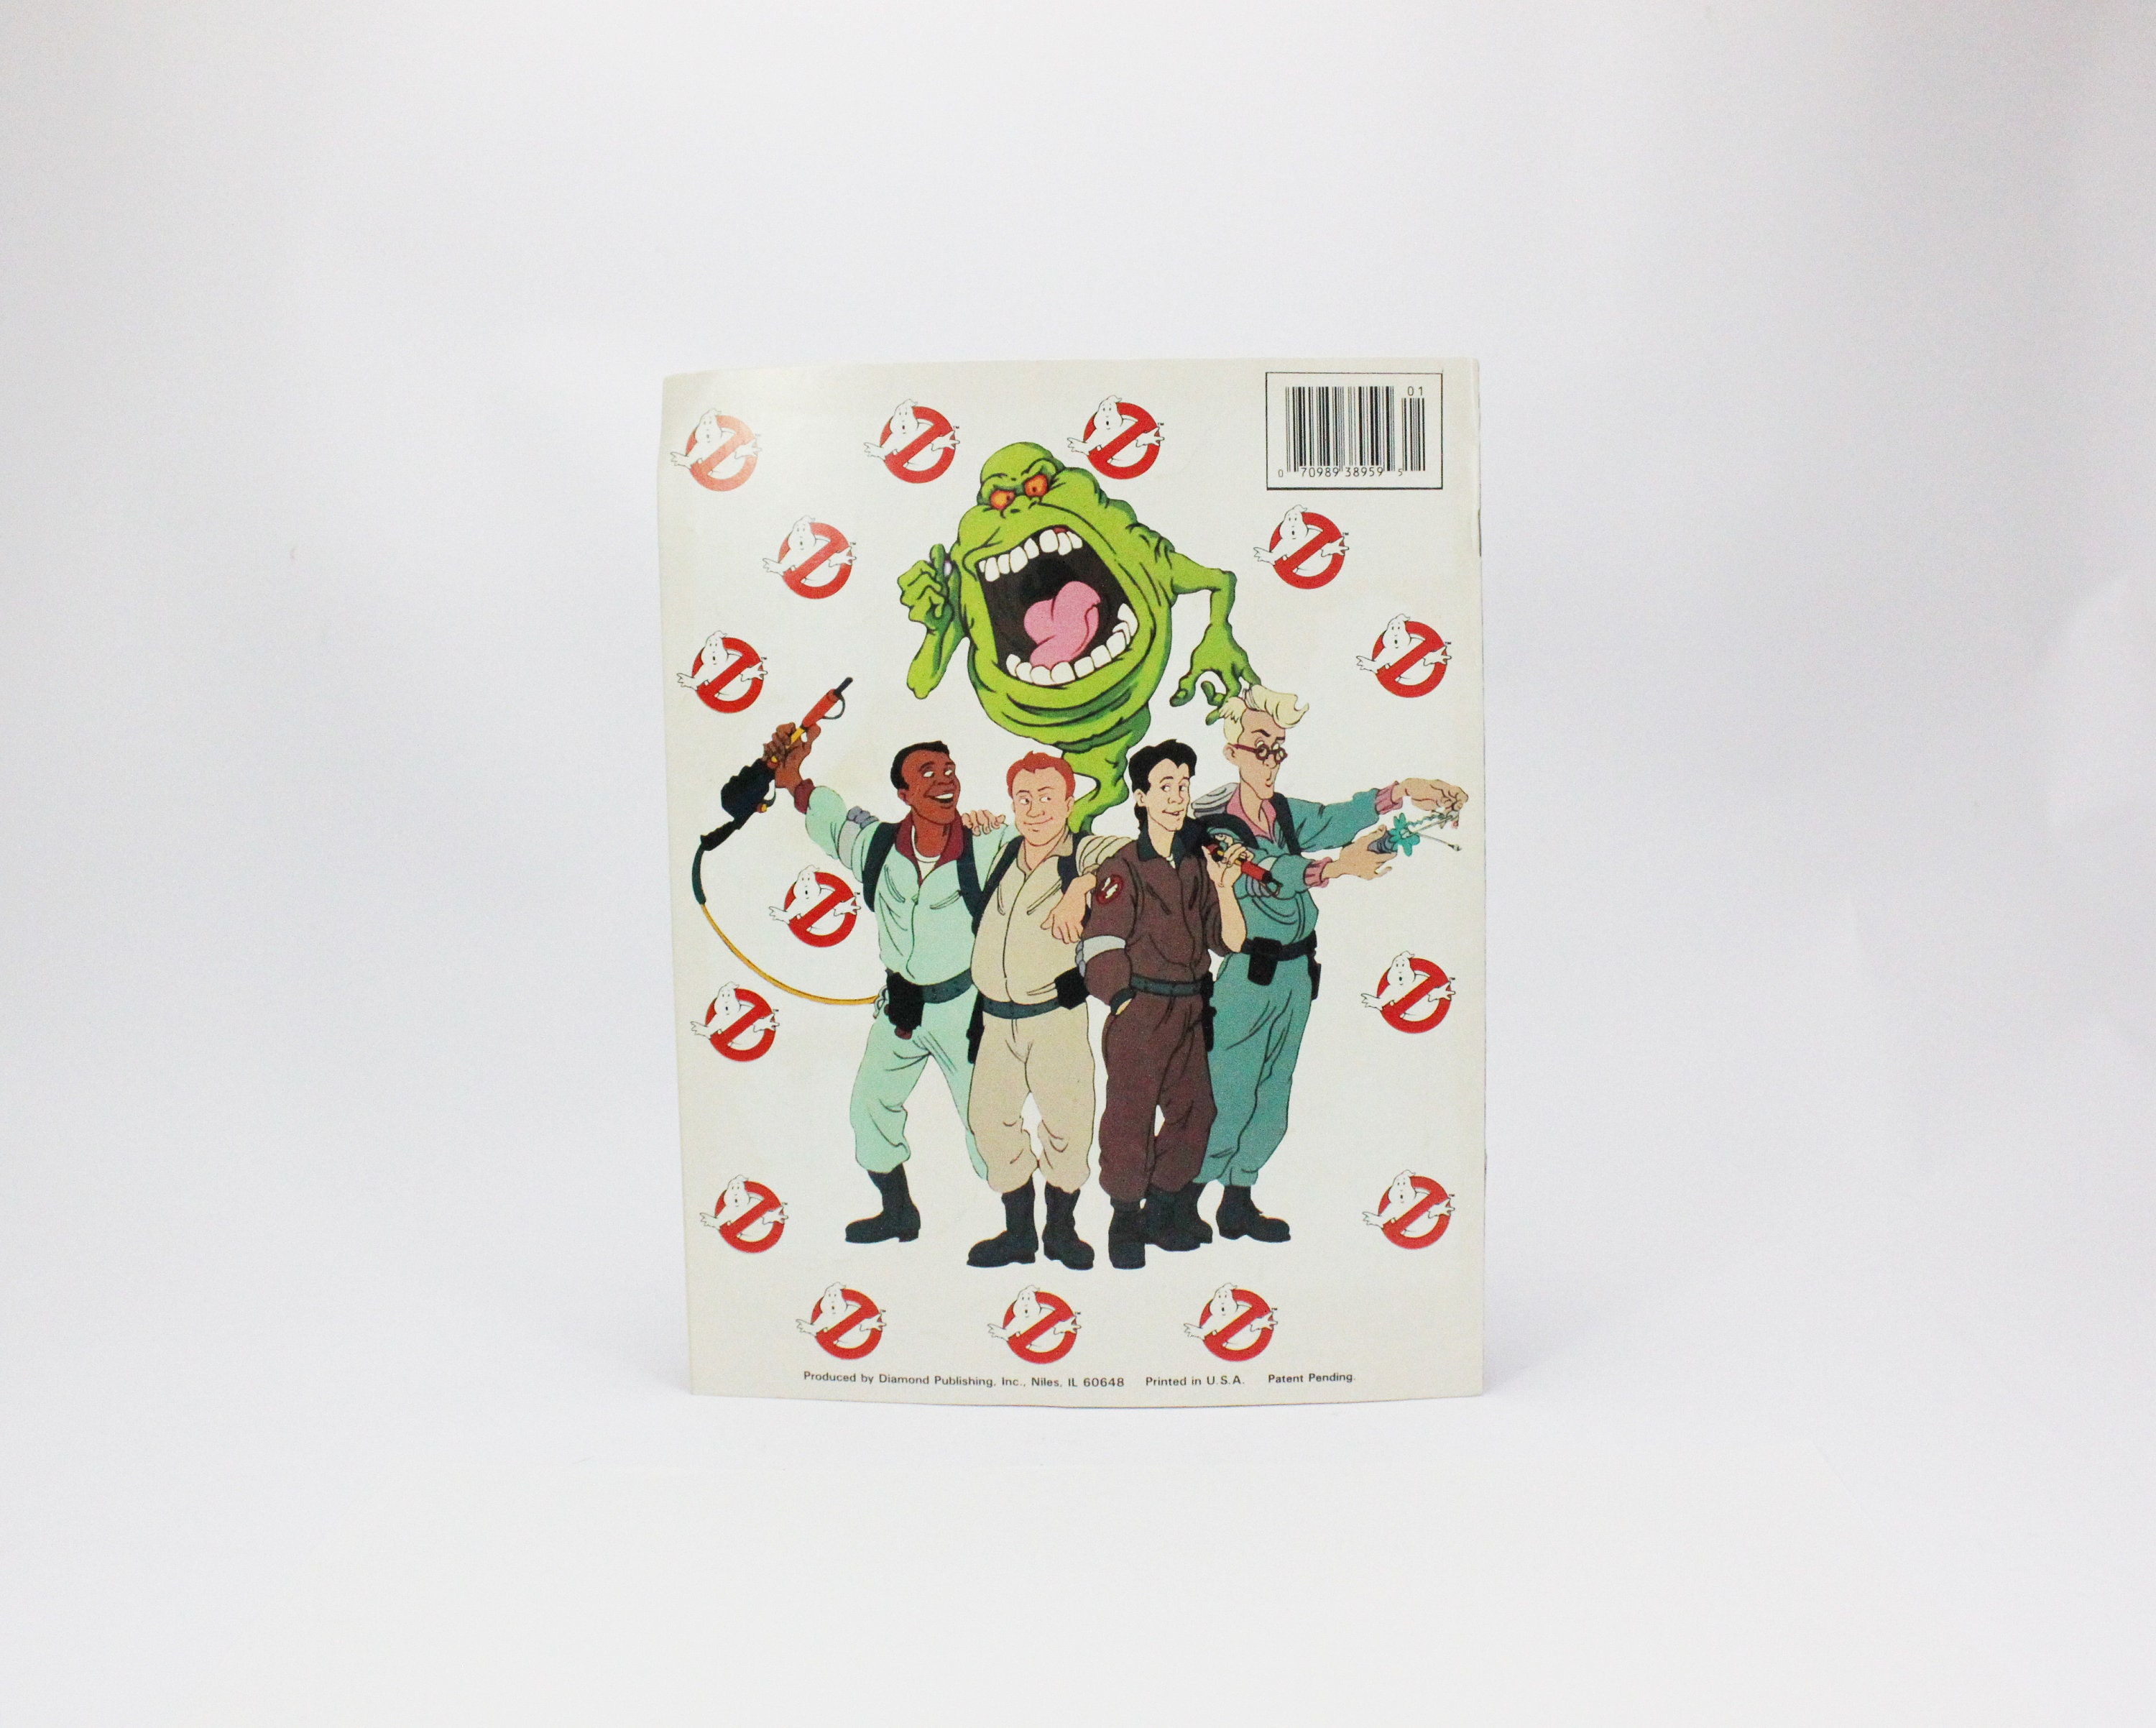 Ghostbusters Album stickers Complete To Paste from Argentina